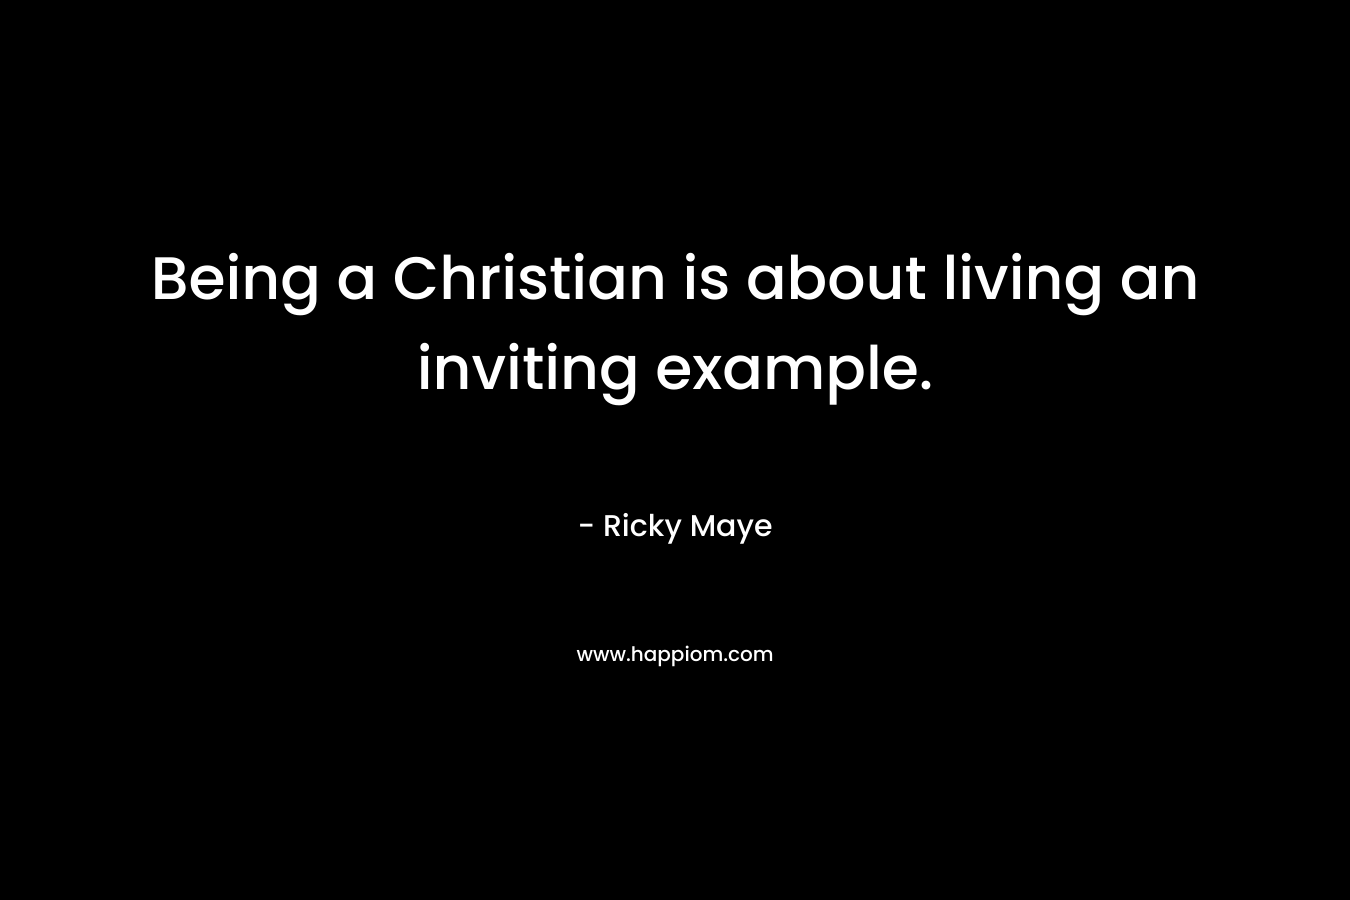 Being a Christian is about living an inviting example.